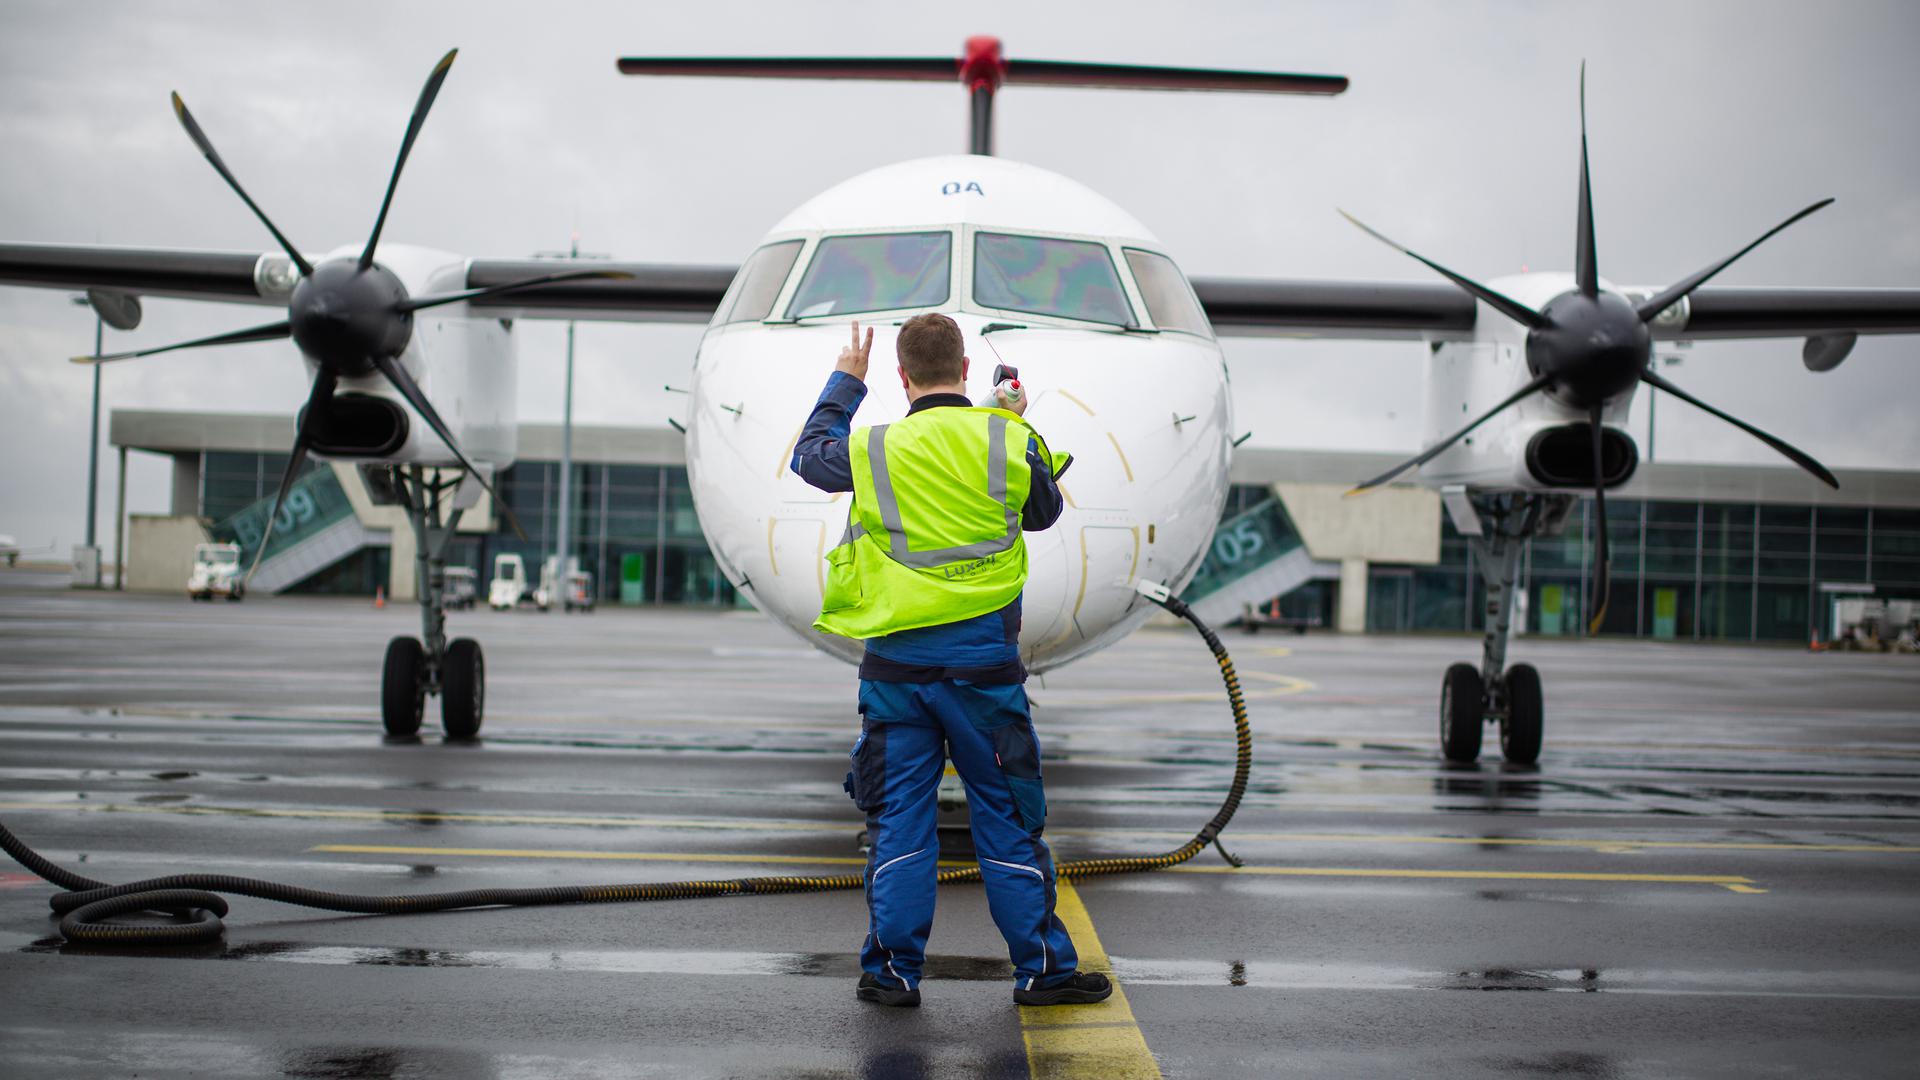 A Luxair worker signals to pilots aboard one of the airline's planes